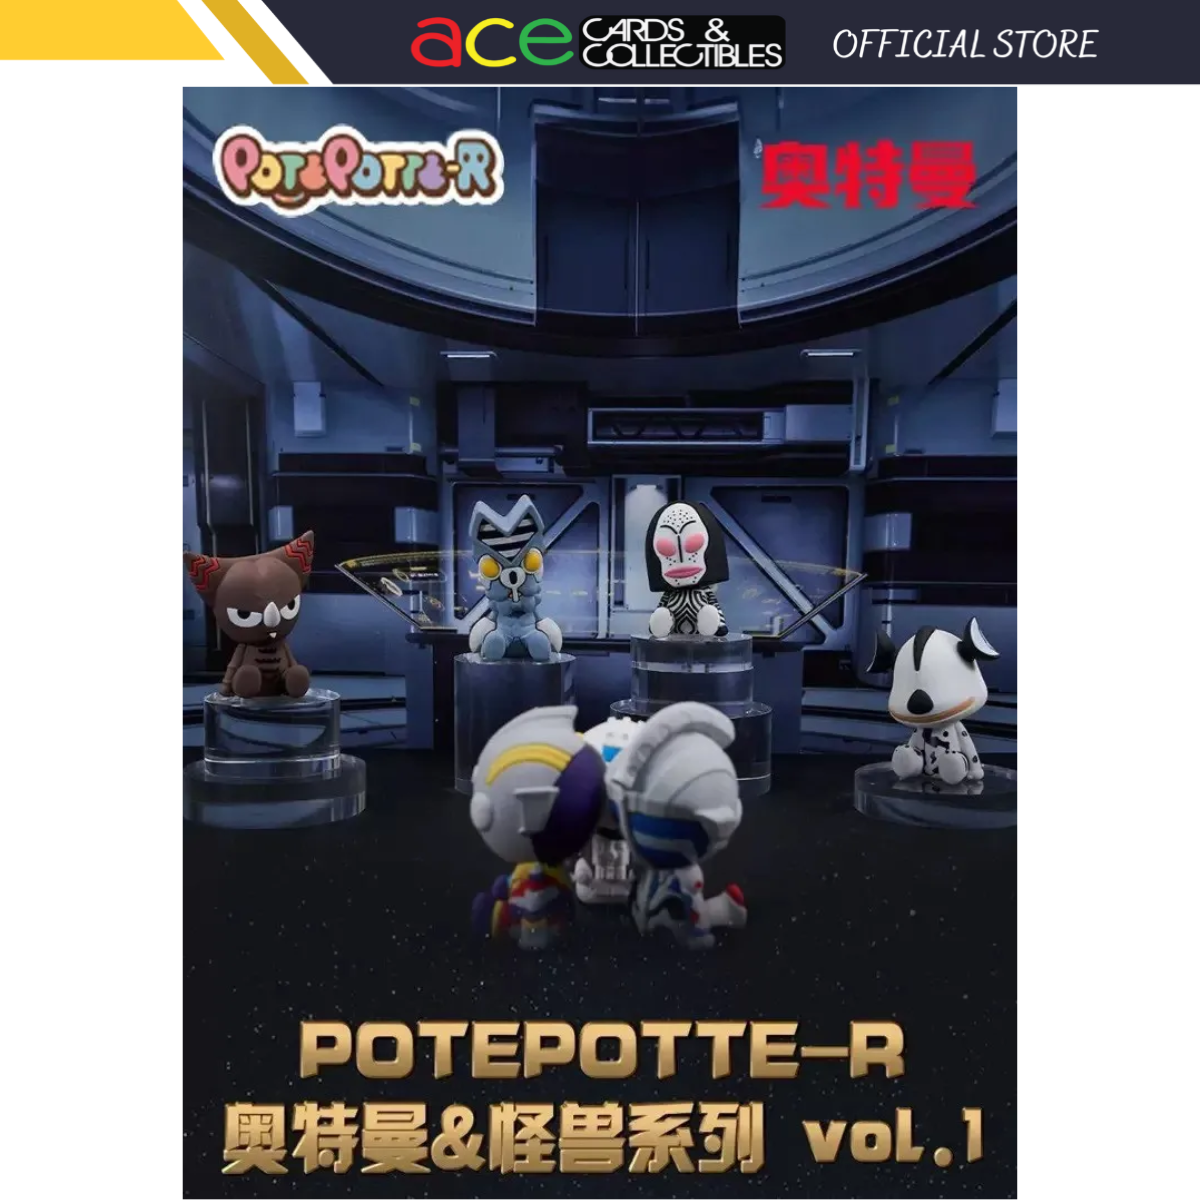 Potepotter-R Ultraman & Monster Series Vol.1-Single Box (Random)-Potepotter-R-Ace Cards & Collectibles